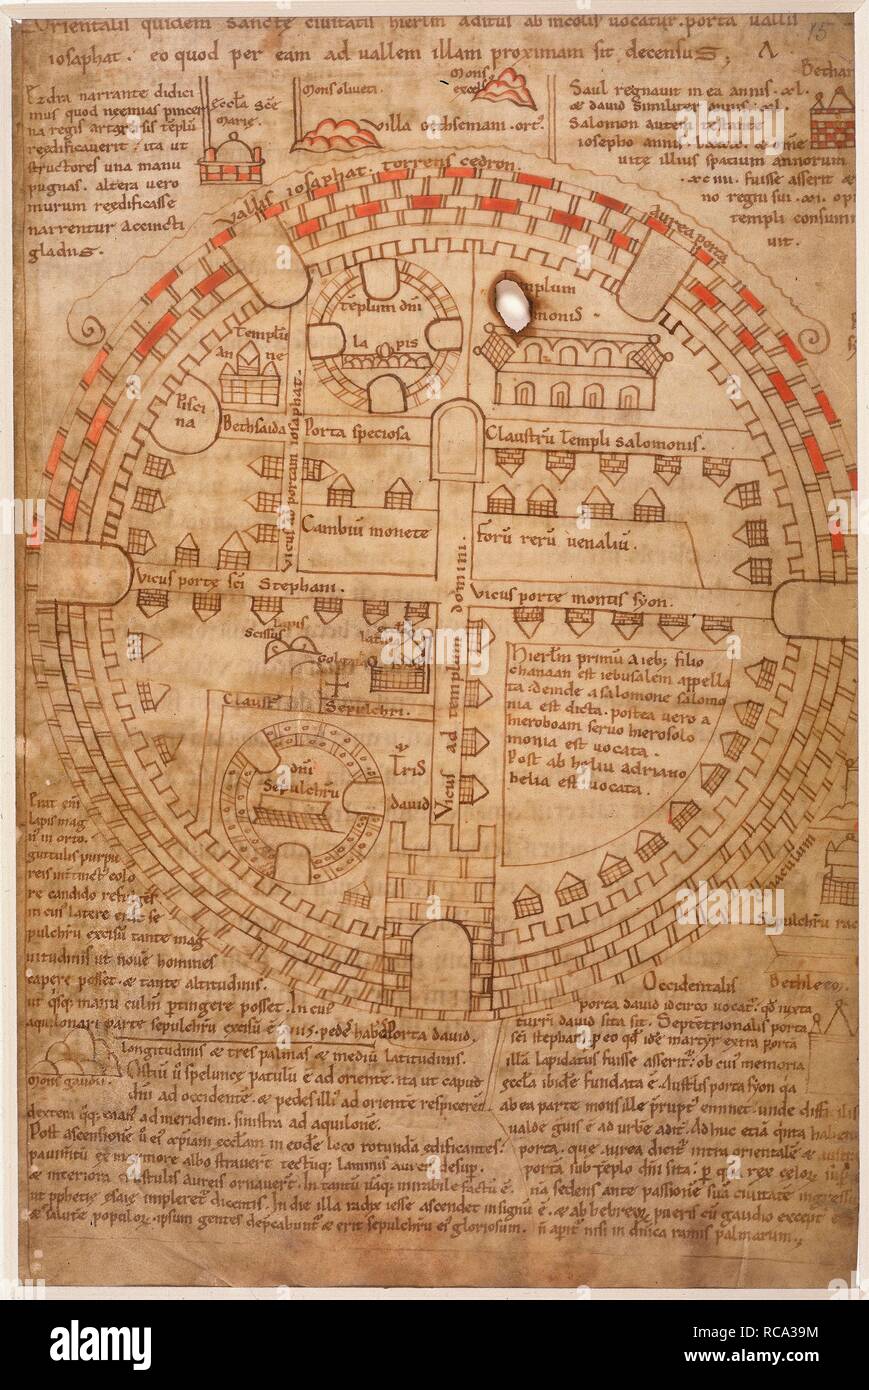 Plan of Jerusalem. 13th century. (Whole plan) Circular plan of Jerusalem, showing the Holy Sepulchre and Temple of Solomon. Outside the walls at the top are the Valley of Jehoshaphat, and the River Cedron with the Mount of Olives beyond  Originally published/produced in 13th century. . Source: Add. 32343, f.15. Language: Latin. Stock Photo